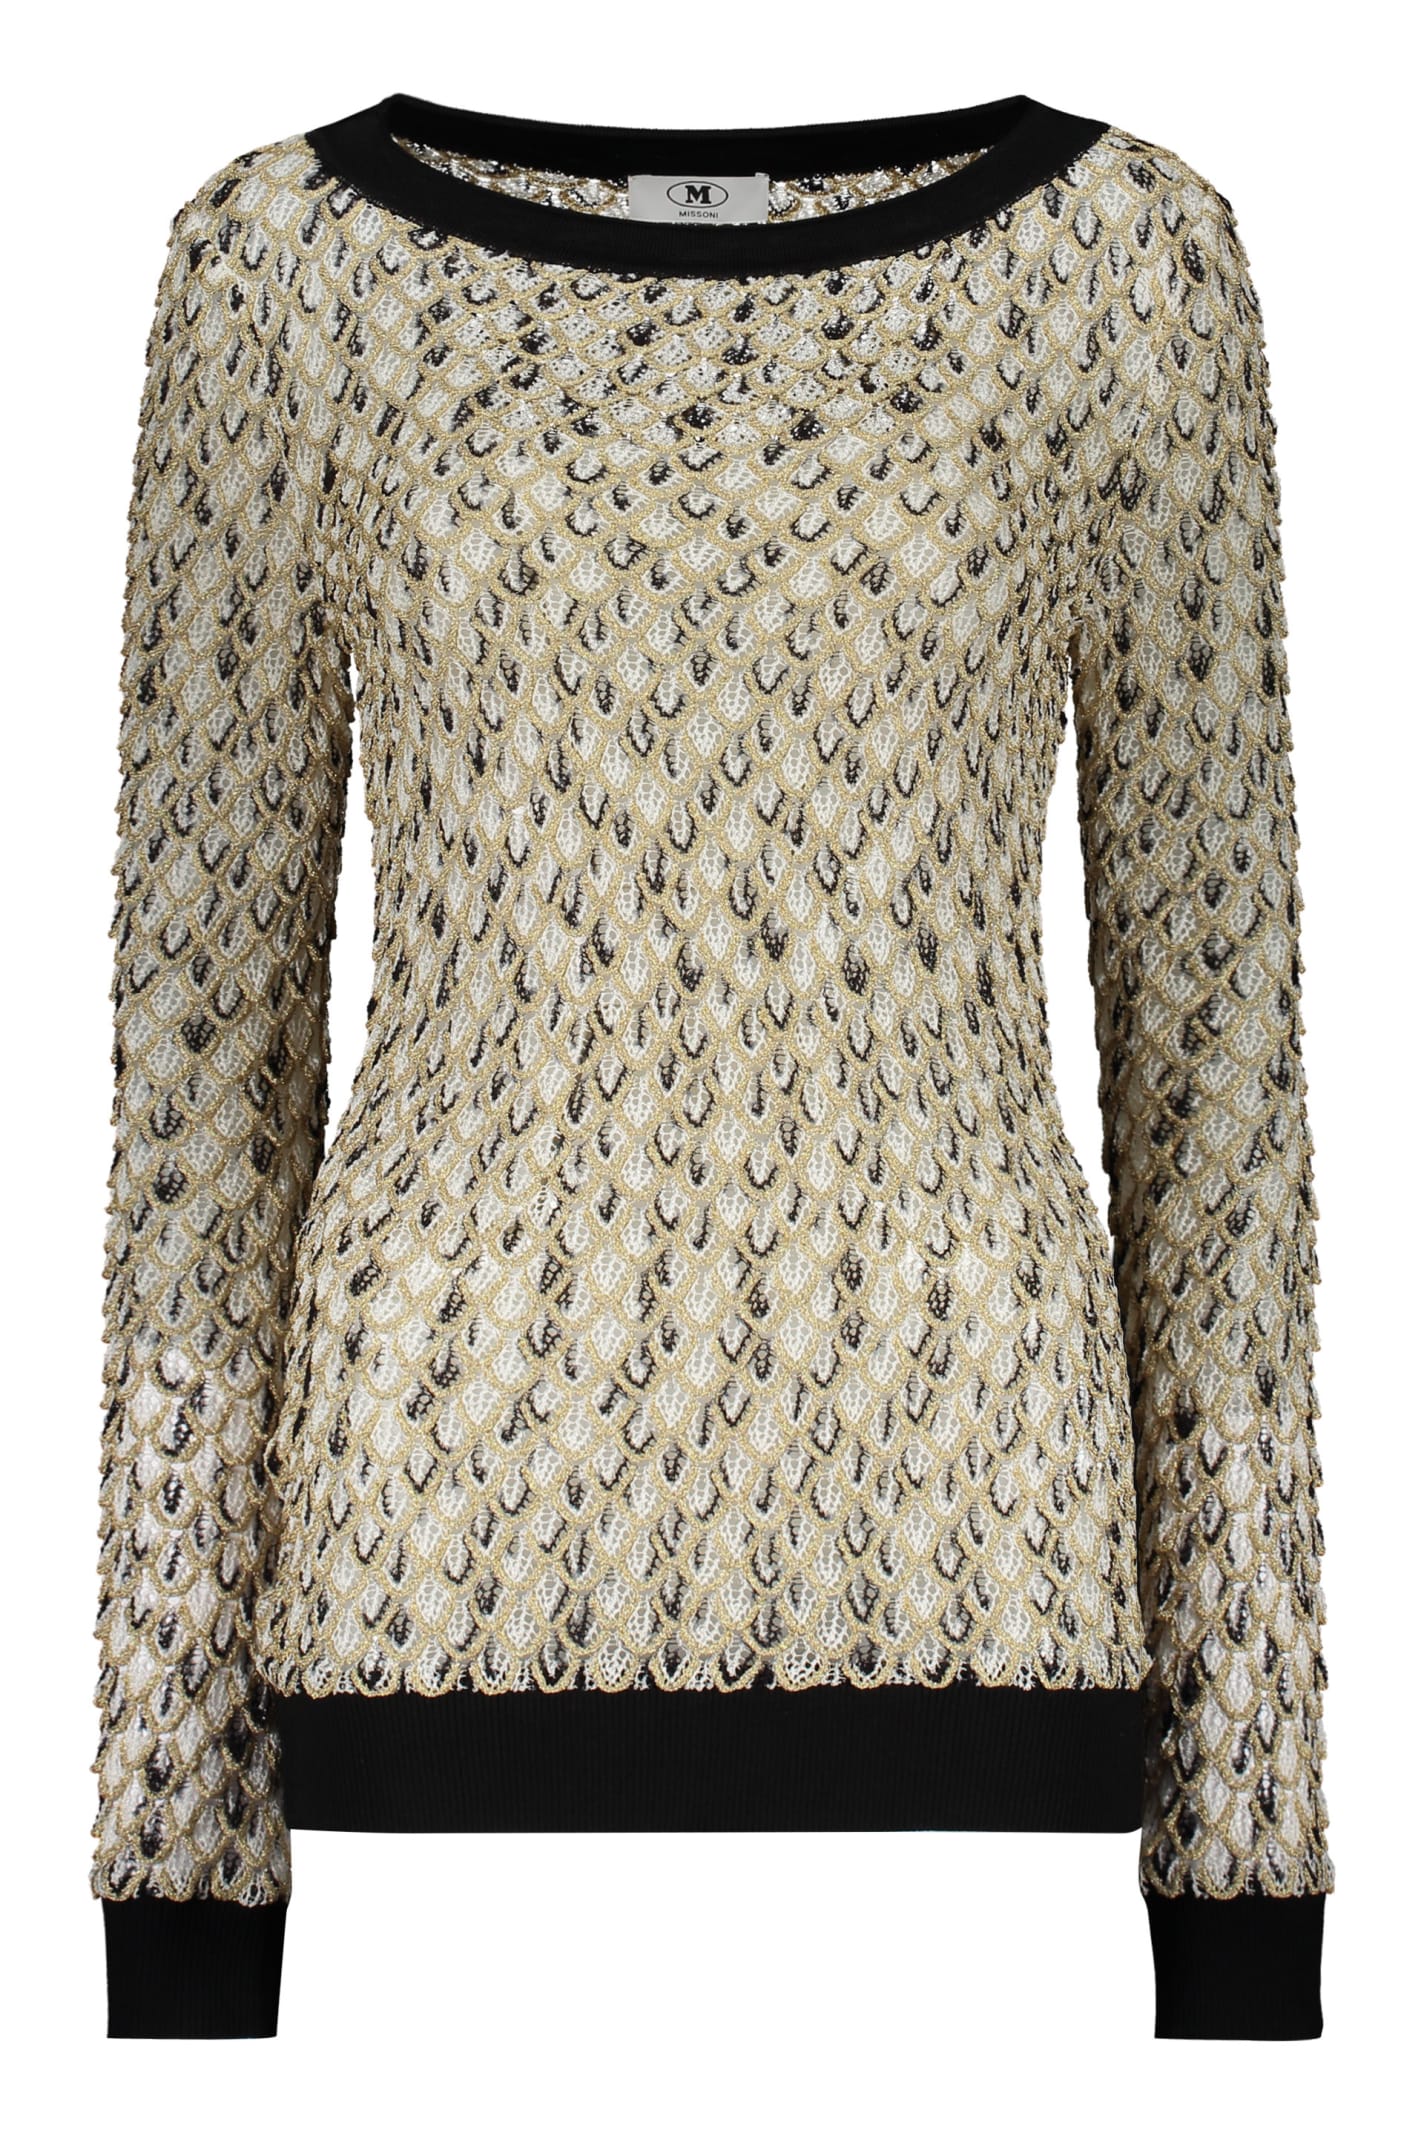 Missoni Long Sleeve Sweater In Multicolor